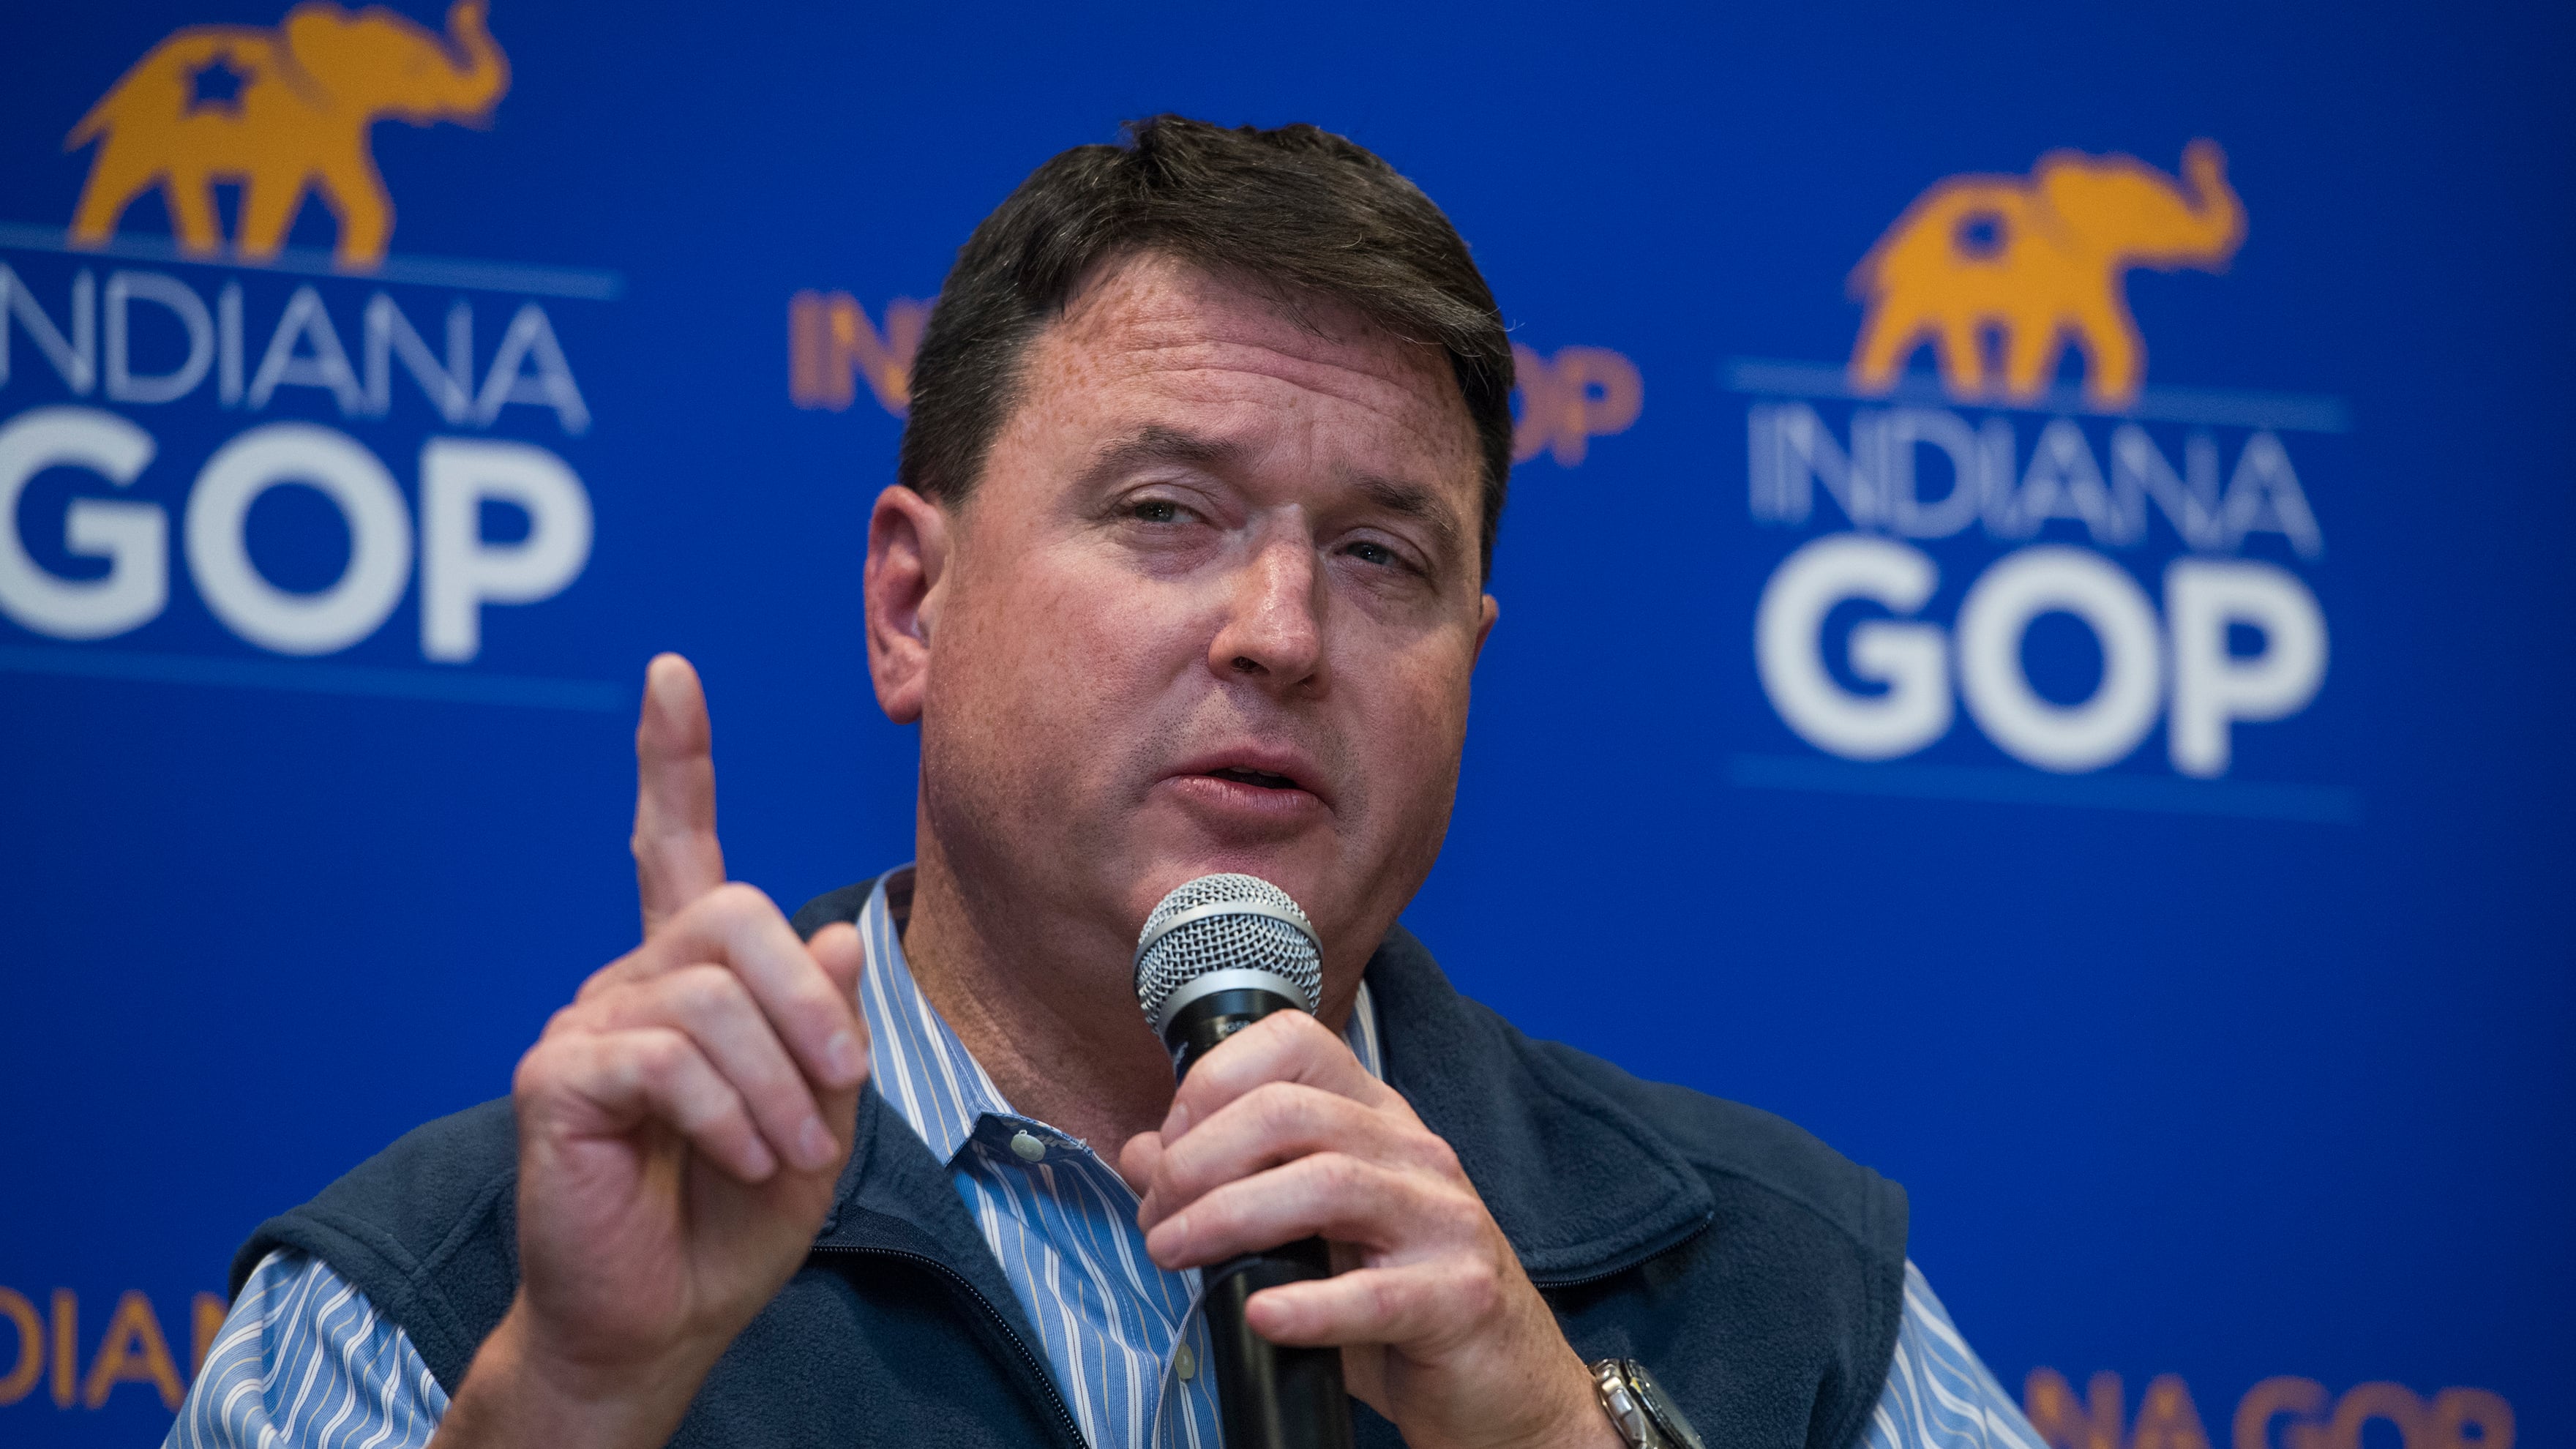 A man with short dark hair and wearing a dark vest over a blue and white stripe shirt holds a microphone and points with his hand. There is a blue background with small elephants and logos that read "Indiana GOP."